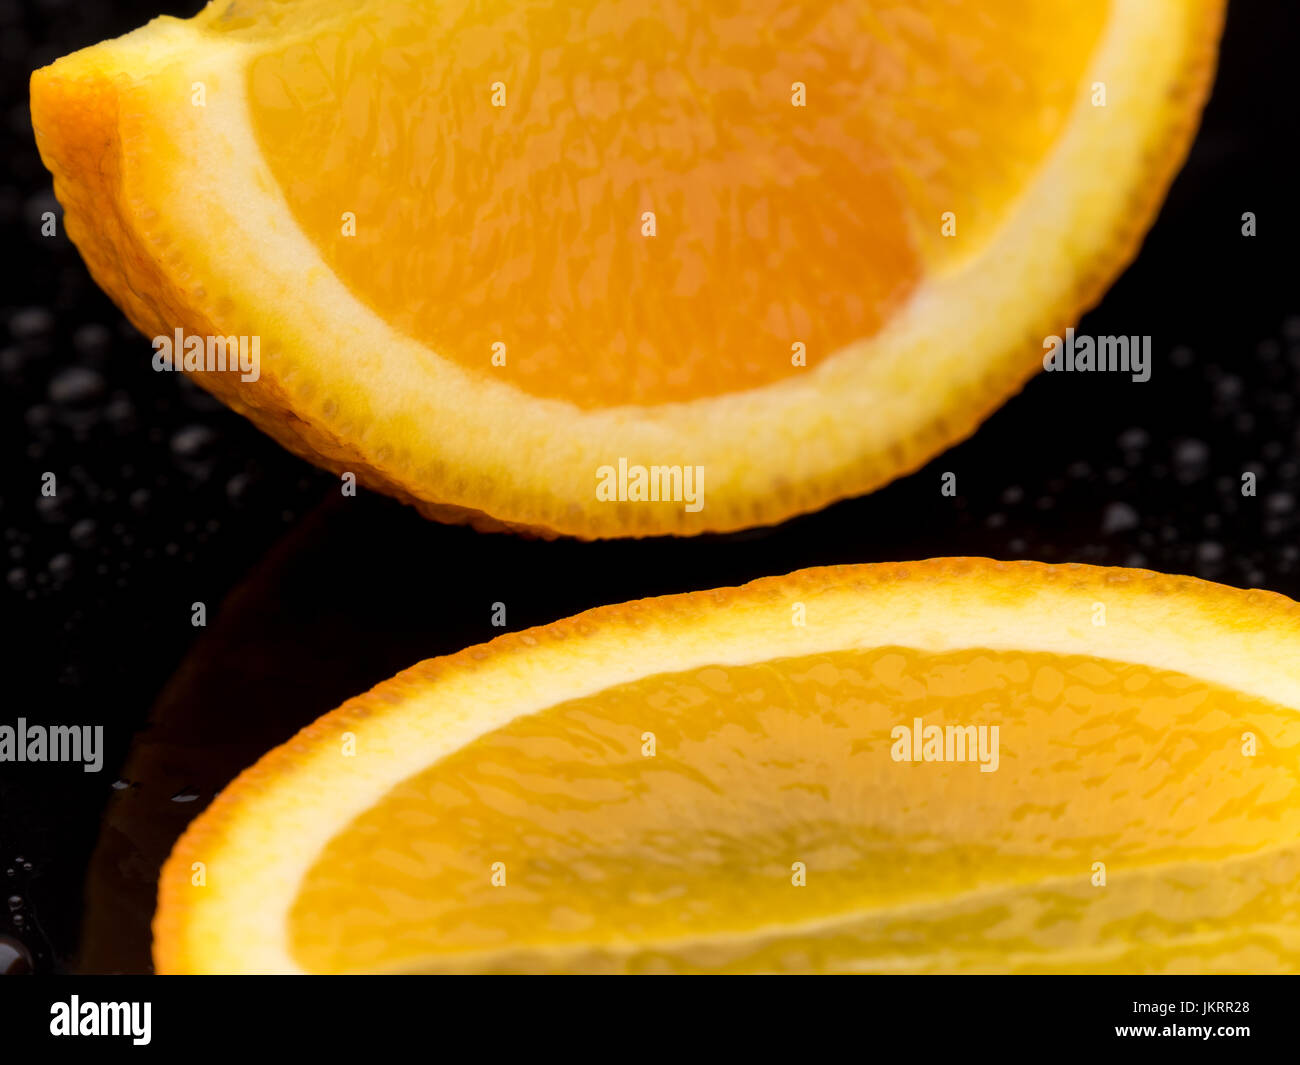 Close-up orange fruit on a black reflective surface with water droplets Stock Photo